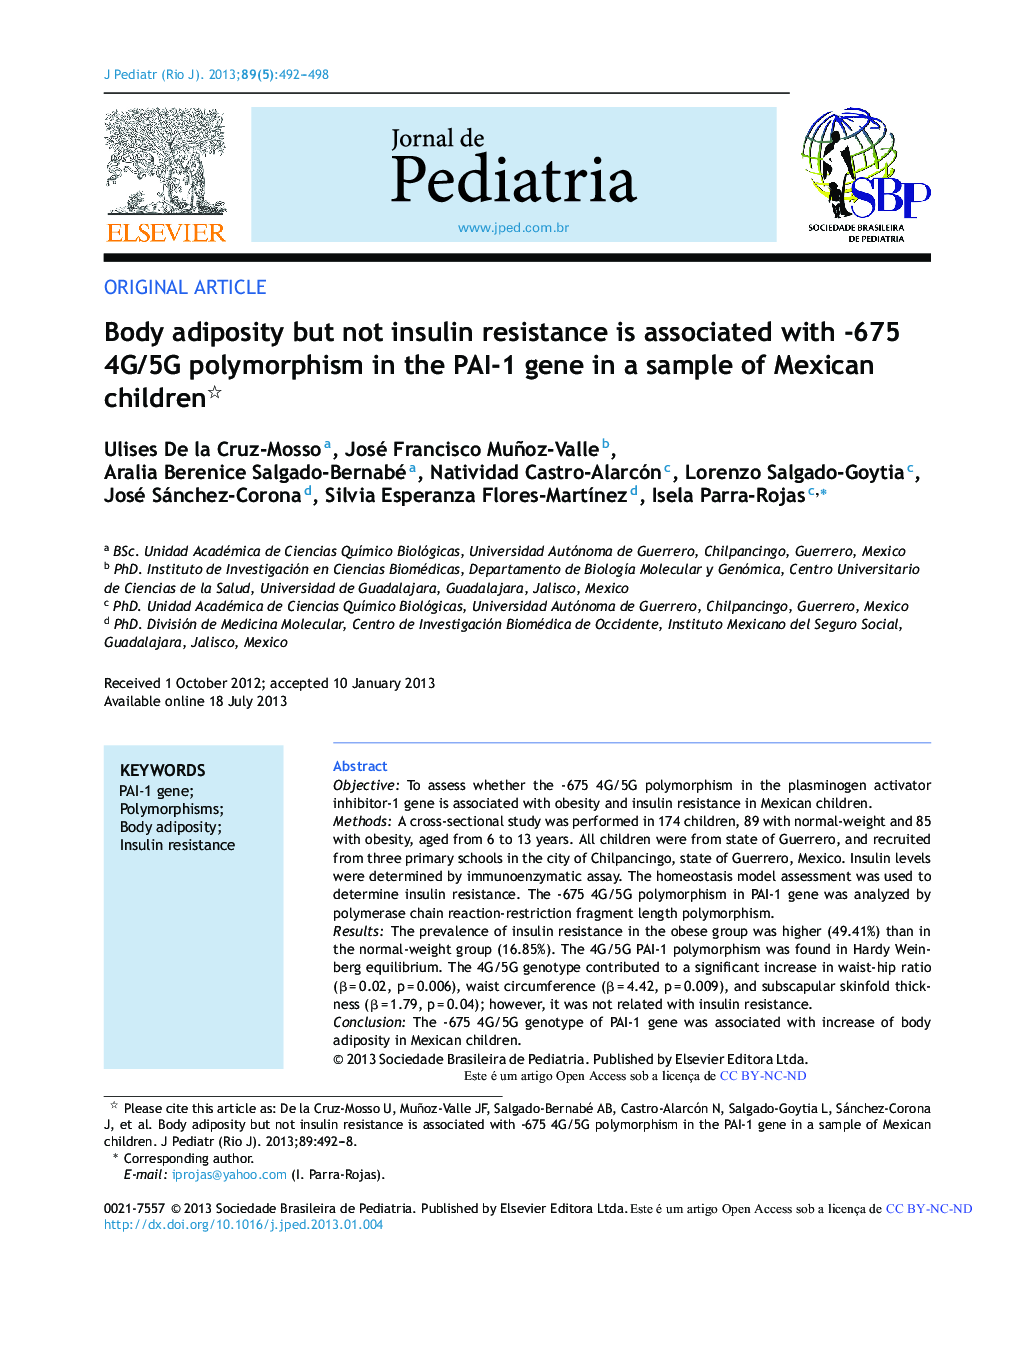 Body adiposity but not insulin resistance is associated with -675 4G/5G polymorphism in the PAI-1 gene in a sample of Mexican children 